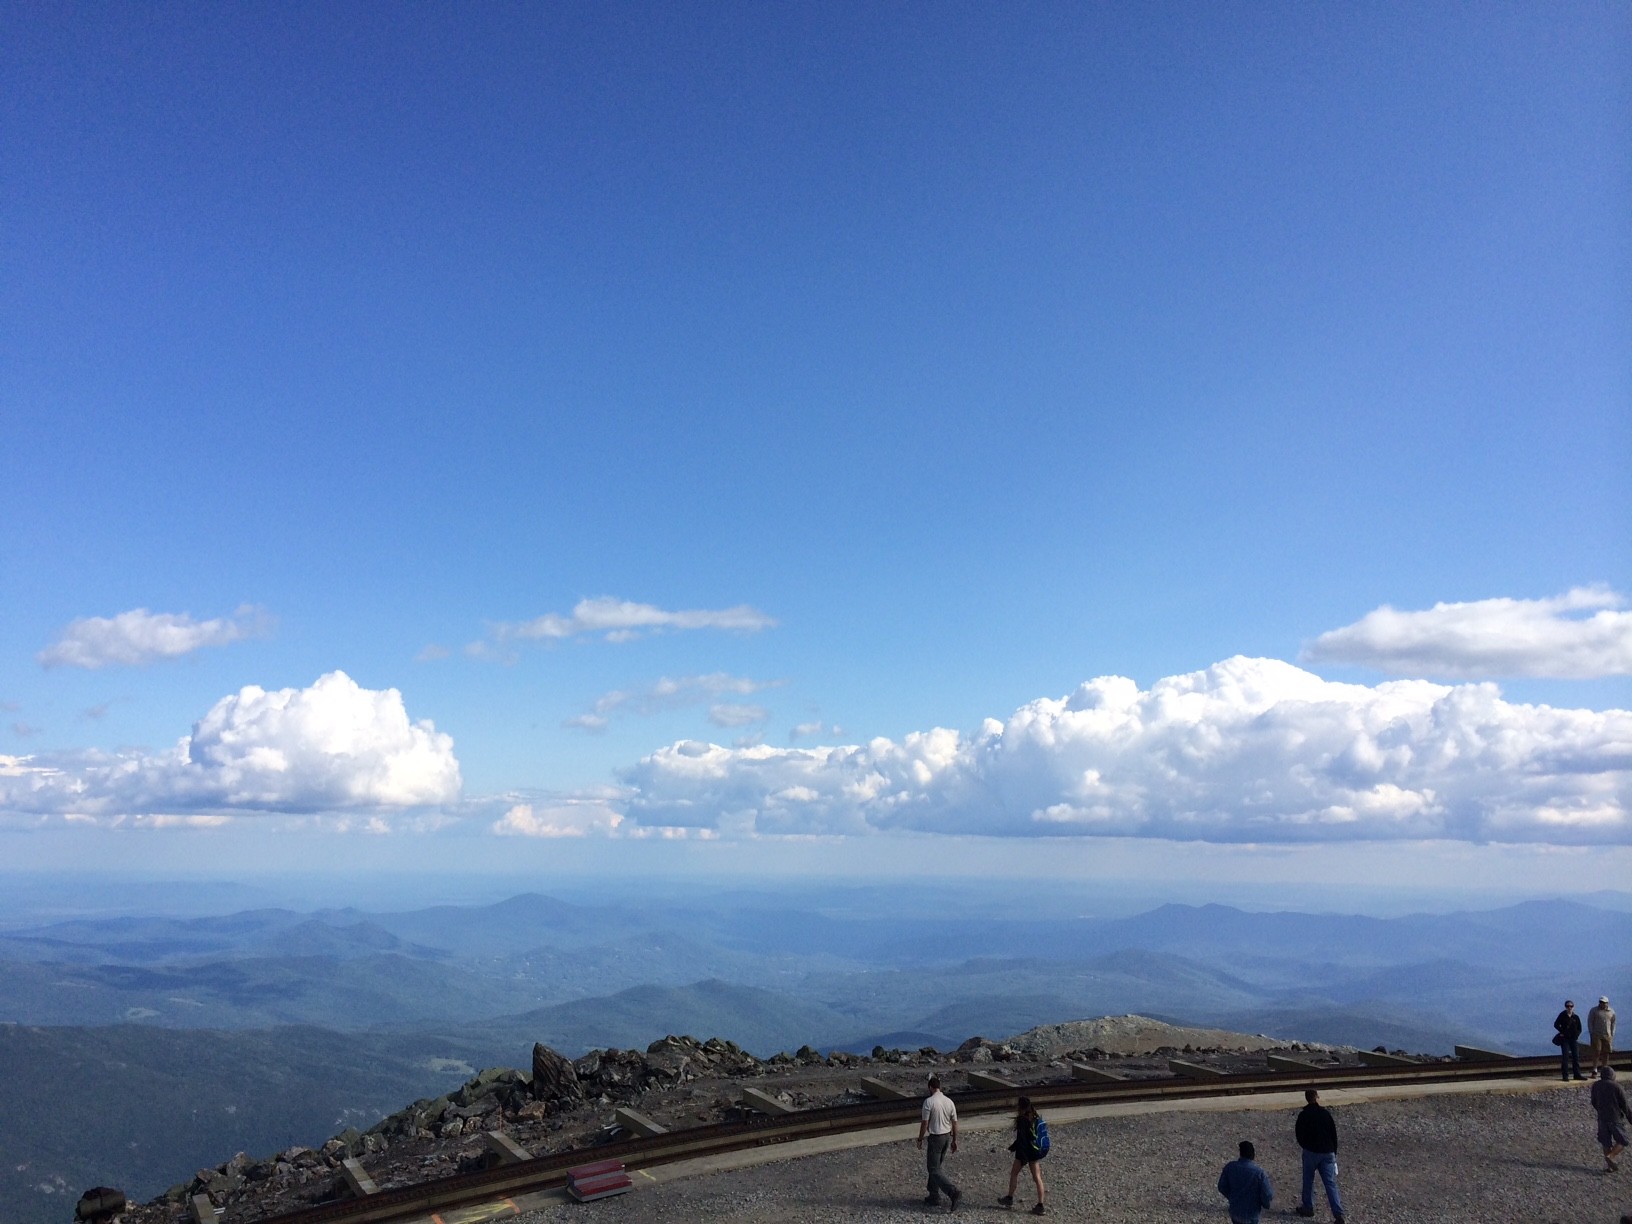 The view from the summit of Mount Washington